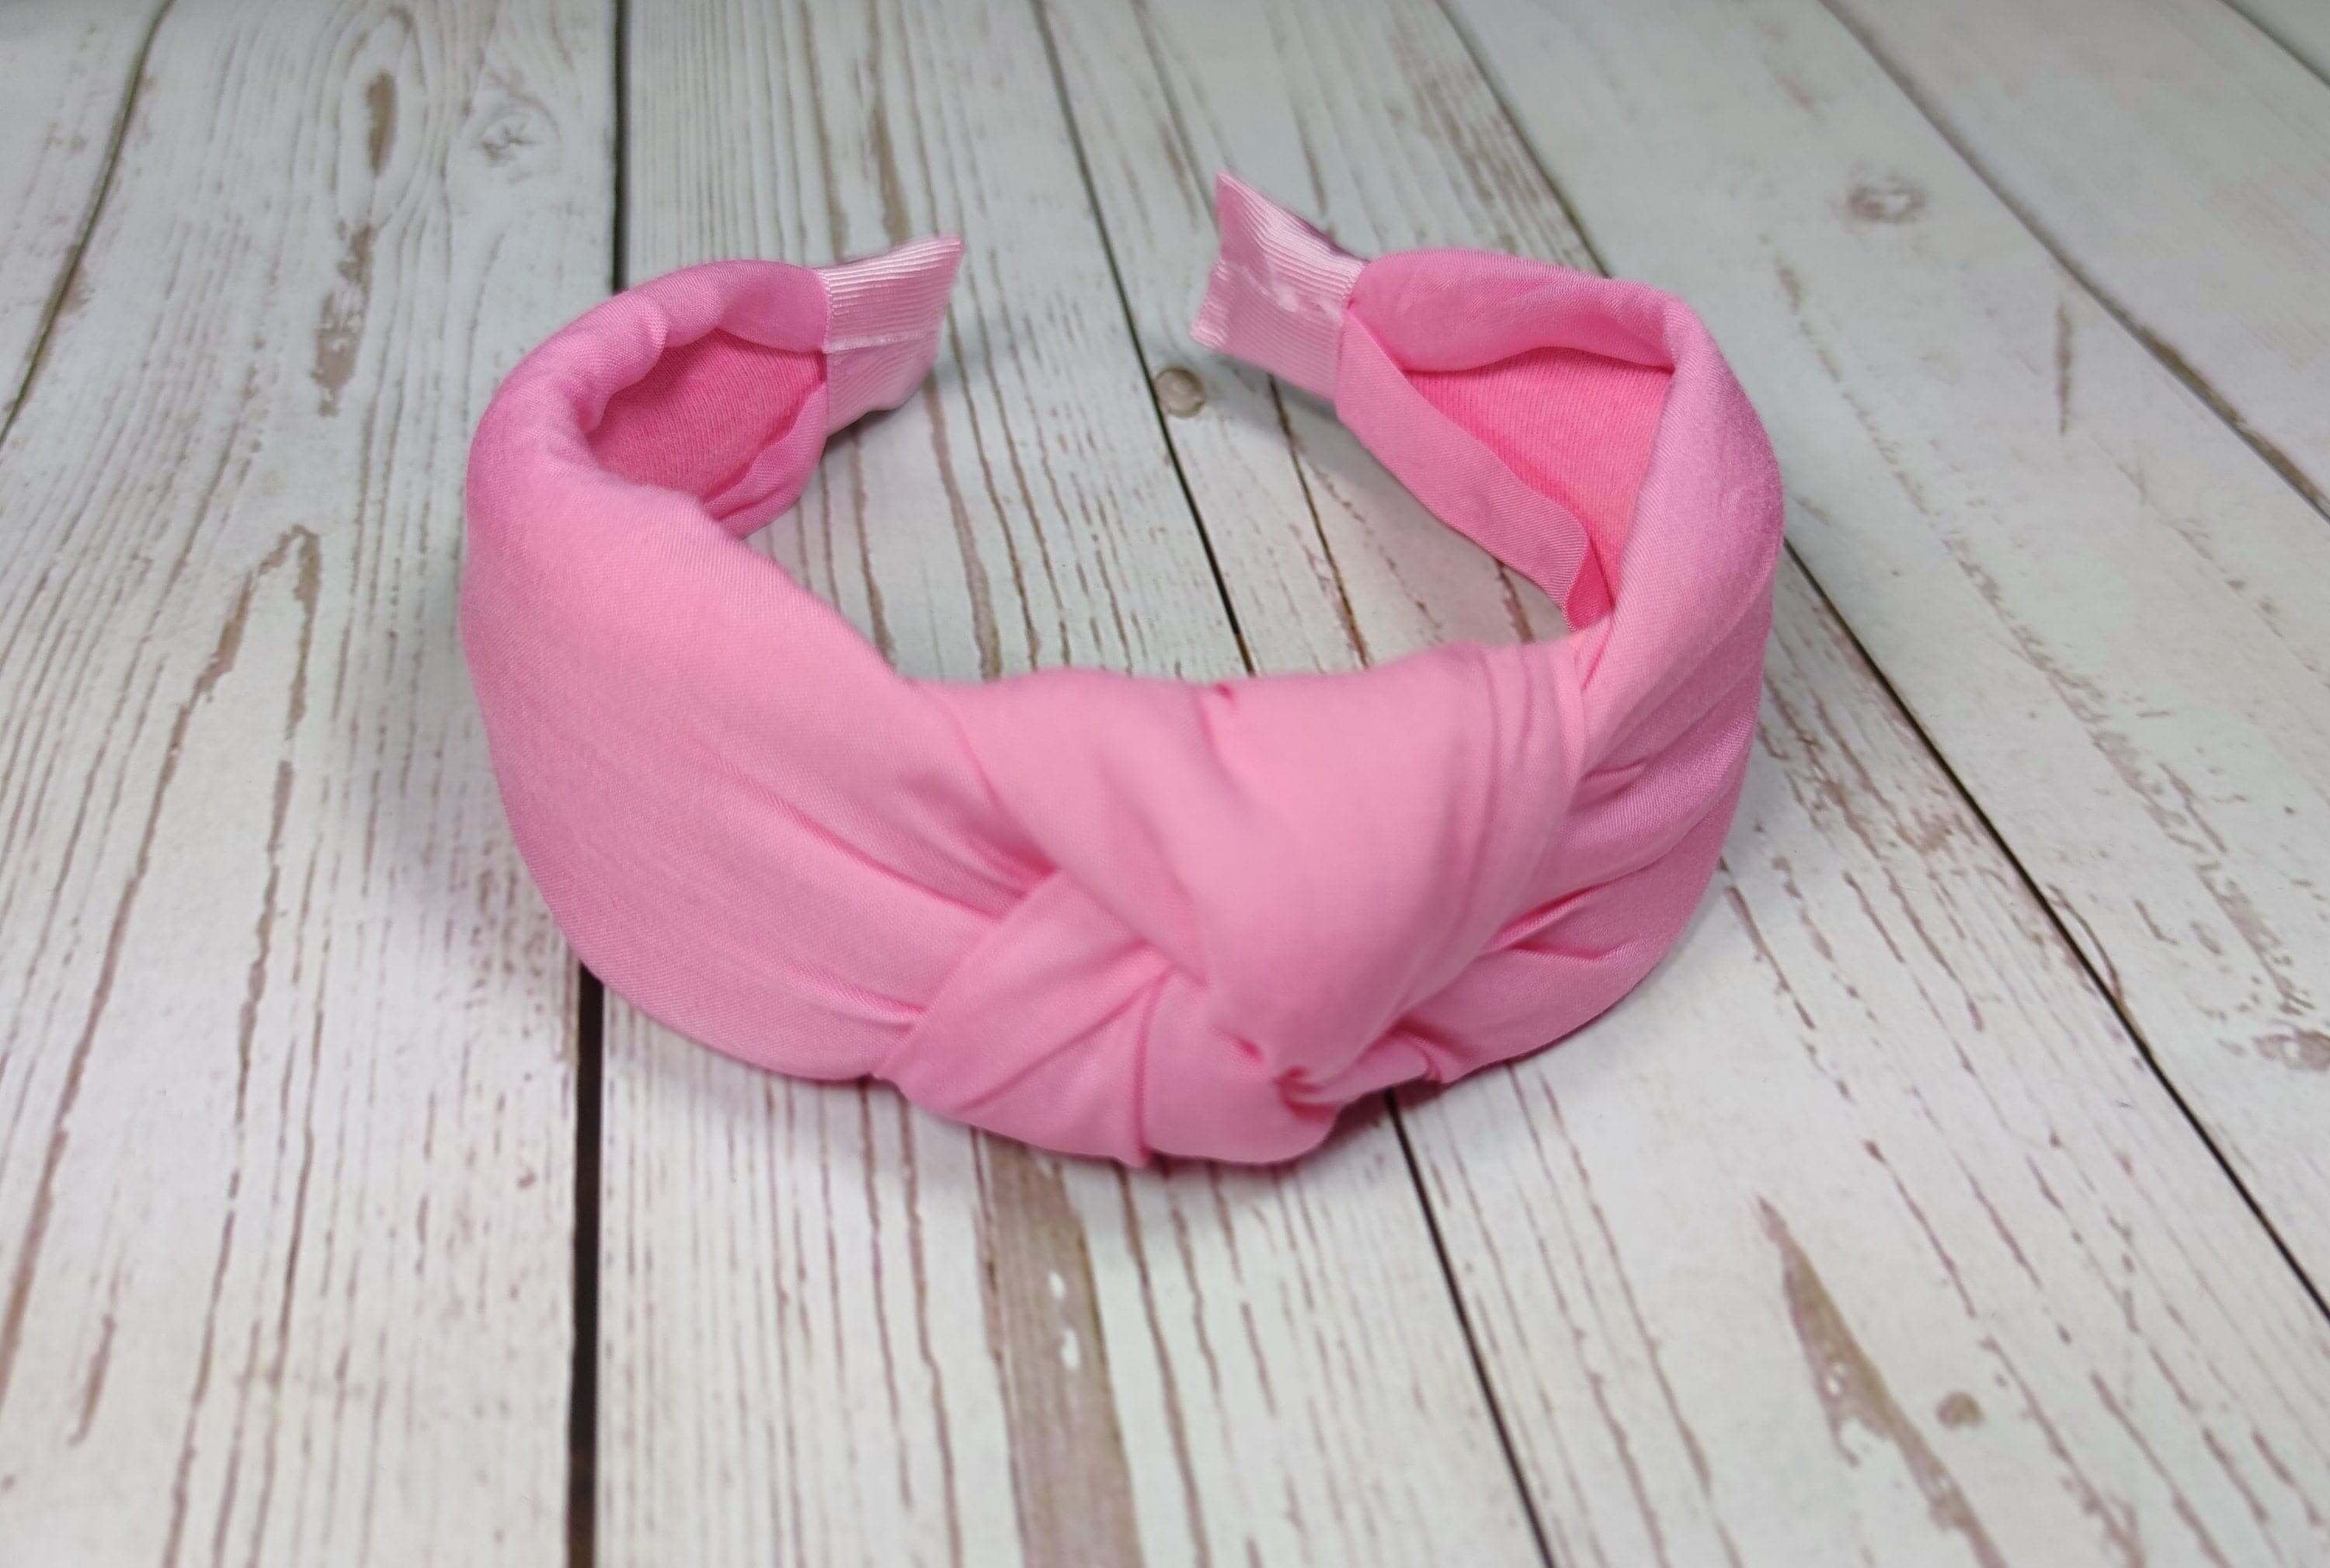 Make a fashion statement with our trendy light pink headband - perfect for a night out or any special occasion! Made from soft and delicate viscose crepe, it will add glamour and élan to your look!